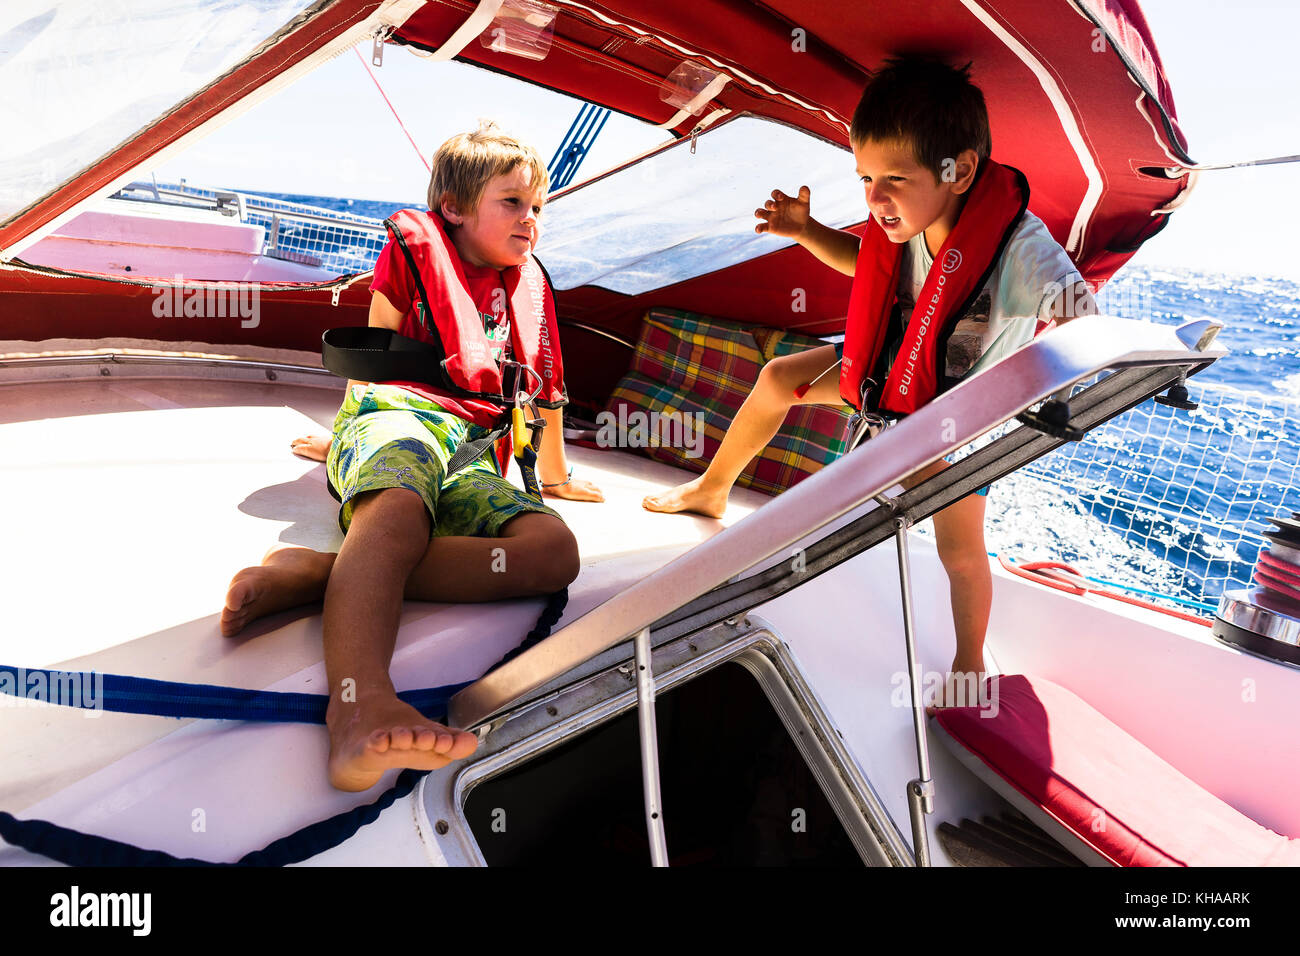 Two boys 5 and 7 years old are playing on a ship, Saint-Pierre, Martinique, France Stock Photo